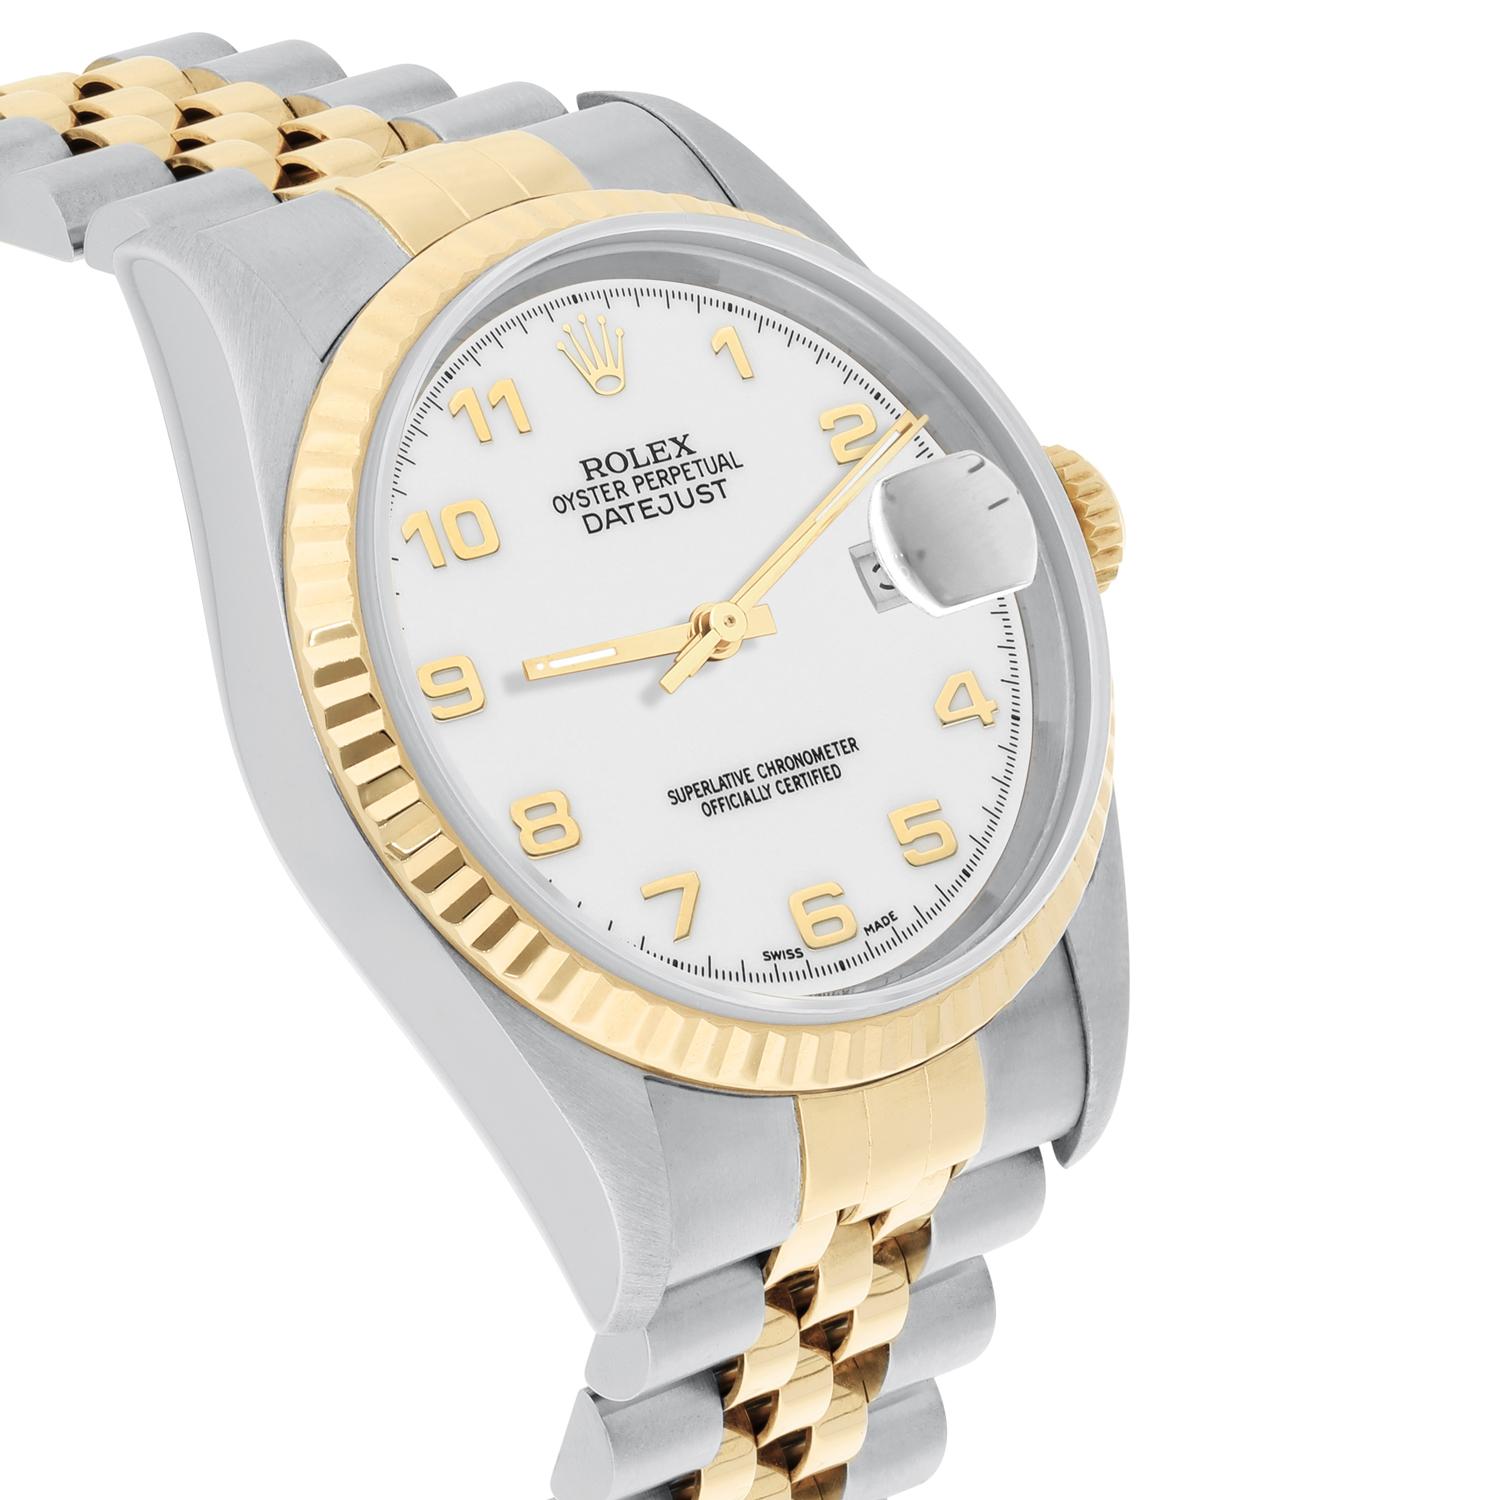 Women's or Men's Rolex Datejust 36mm Two Tone White Arabic Dial Jubilee 16233 Circa 2000 For Sale